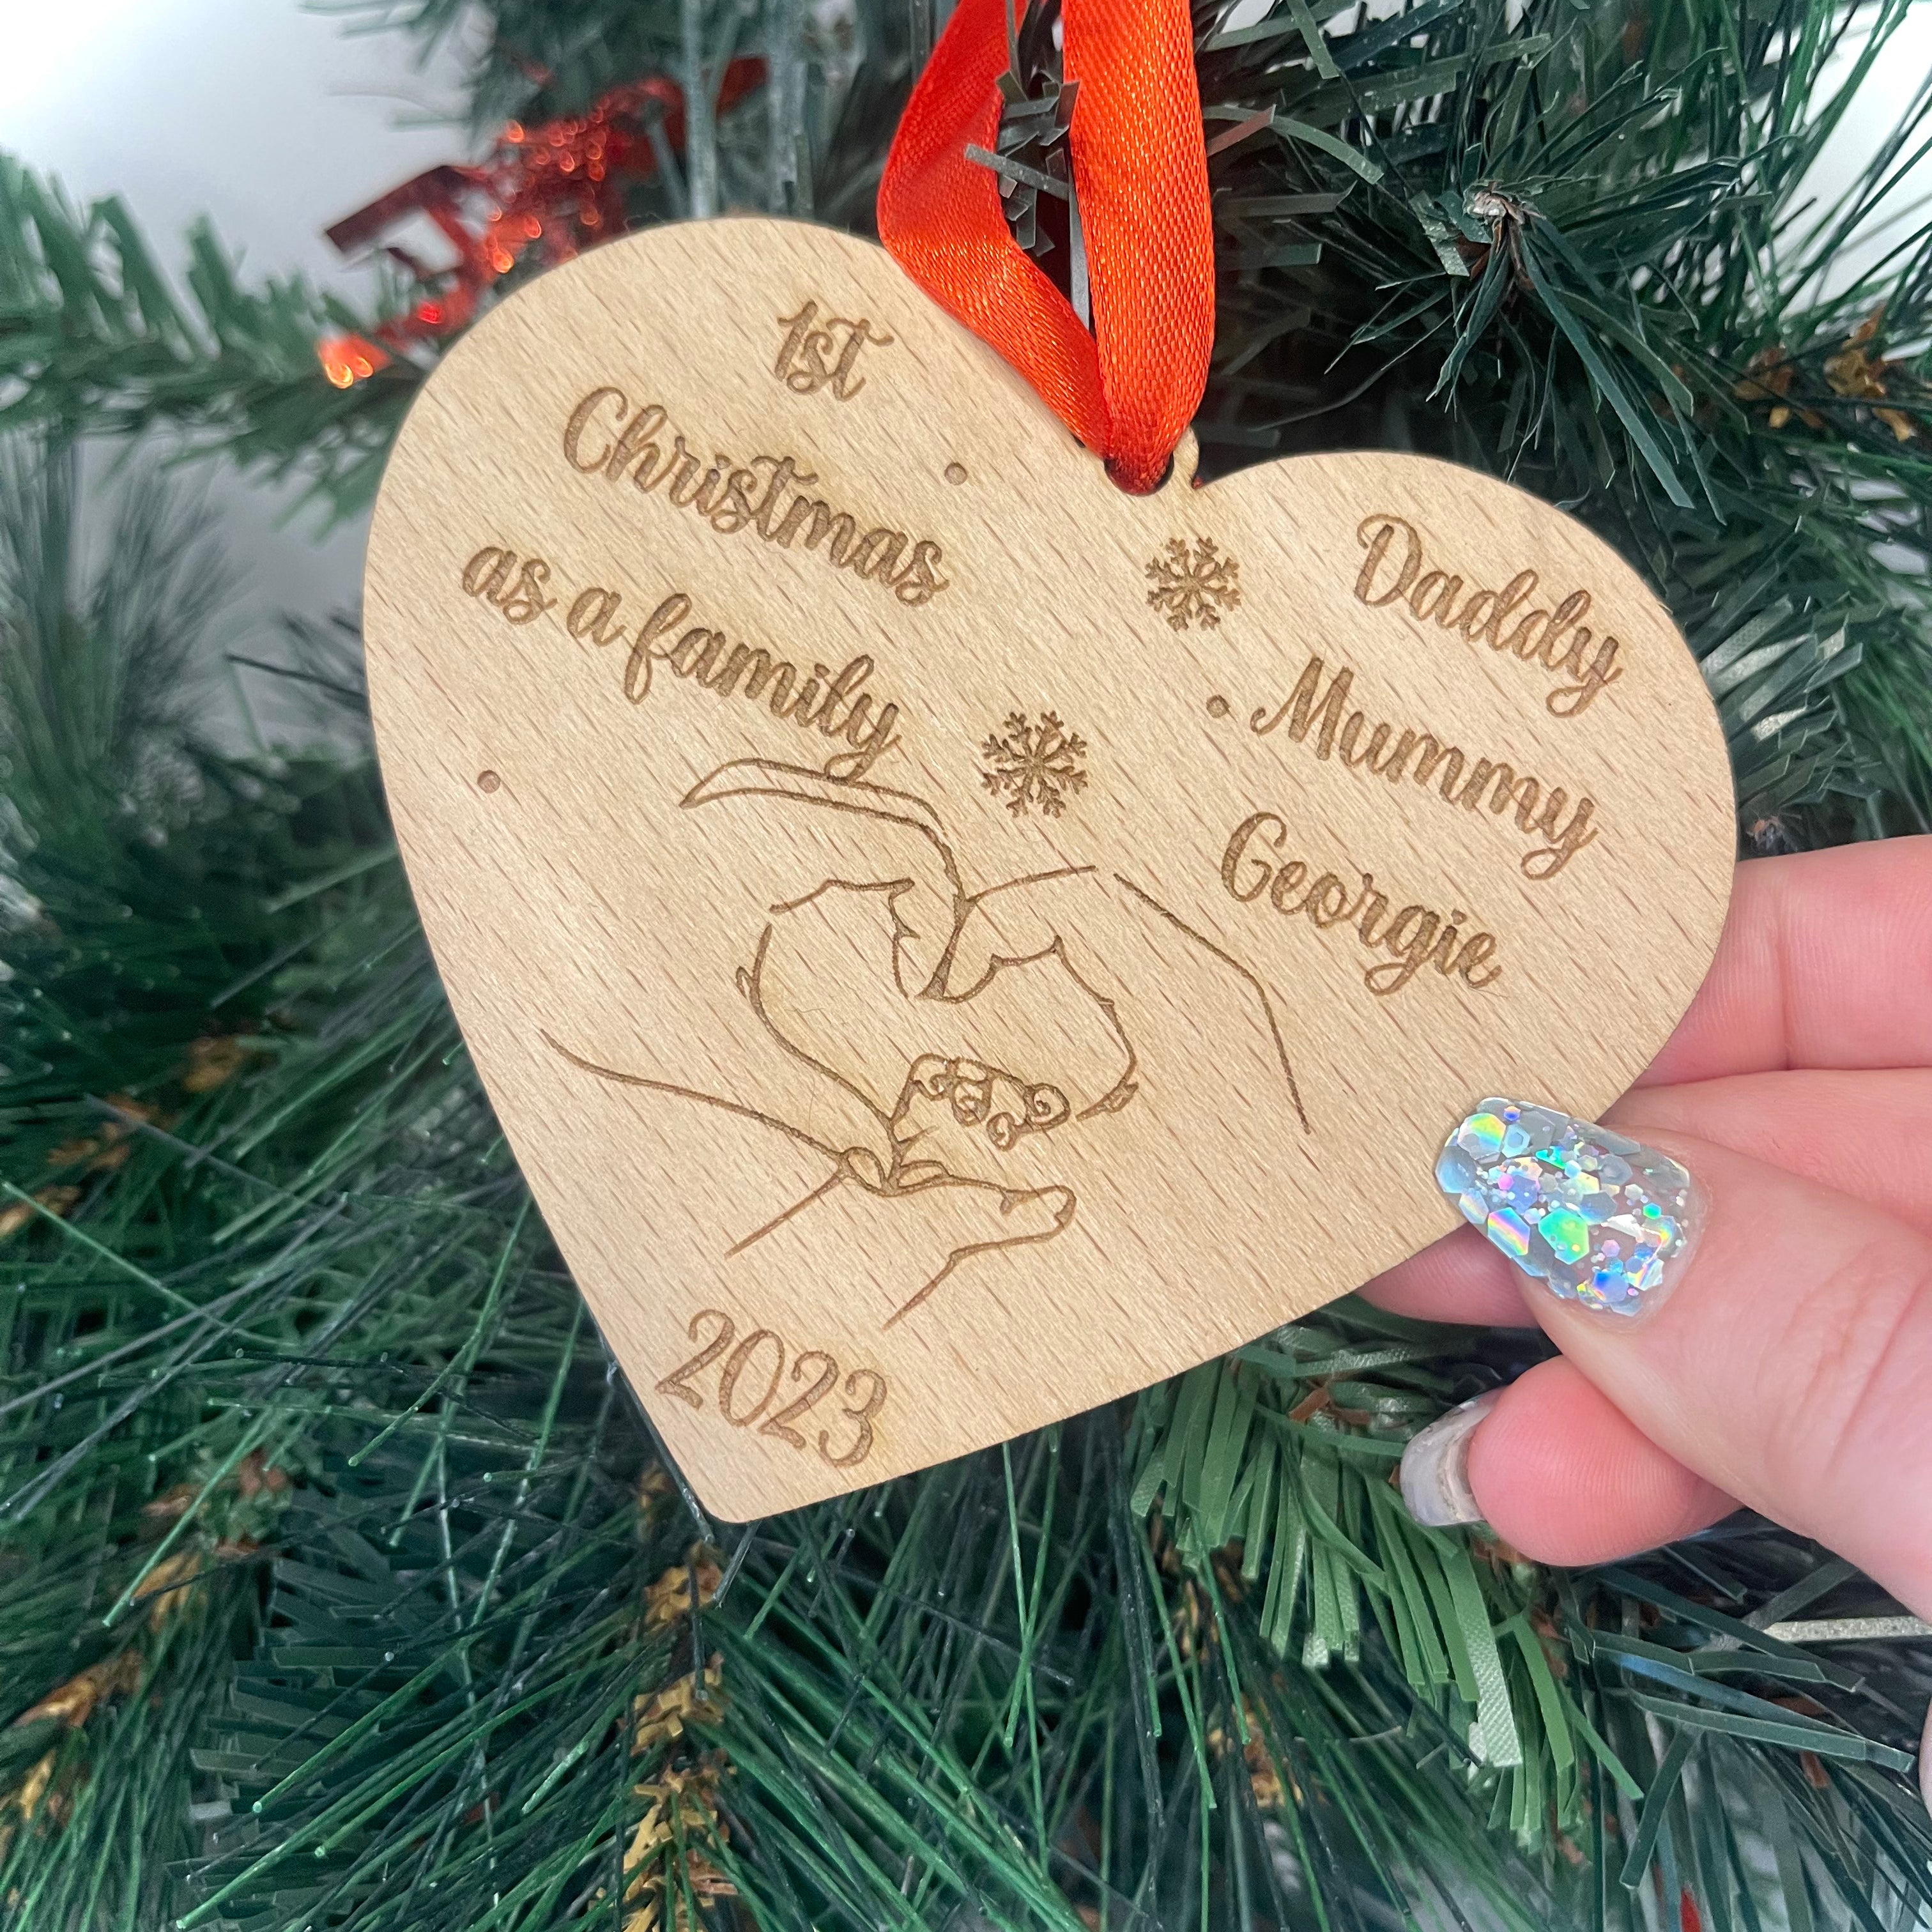 Custom Heart Shaped Christmas Bauble: Crafted from 4mm beech veneer wood, this personalized ornament commemorates '1st Christmas as a Family' with engraved names. Adorned with intertwined hands, year, and a red ribbon, it adds a heartwarming touch to any tree.